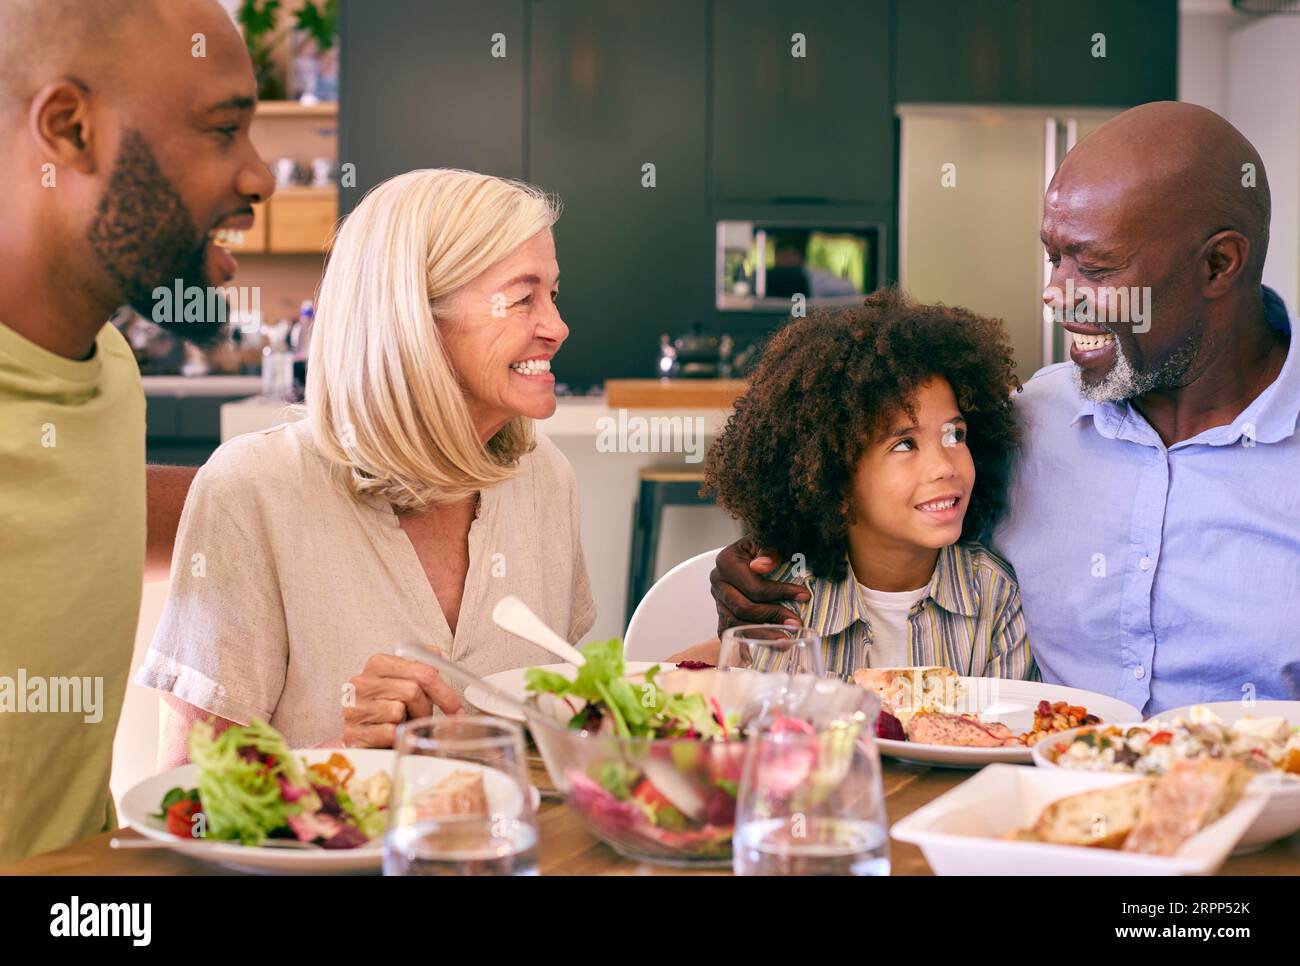 Multi-Generation Family Sitting Around Table Serving Food For Meal At Home Stock Photo